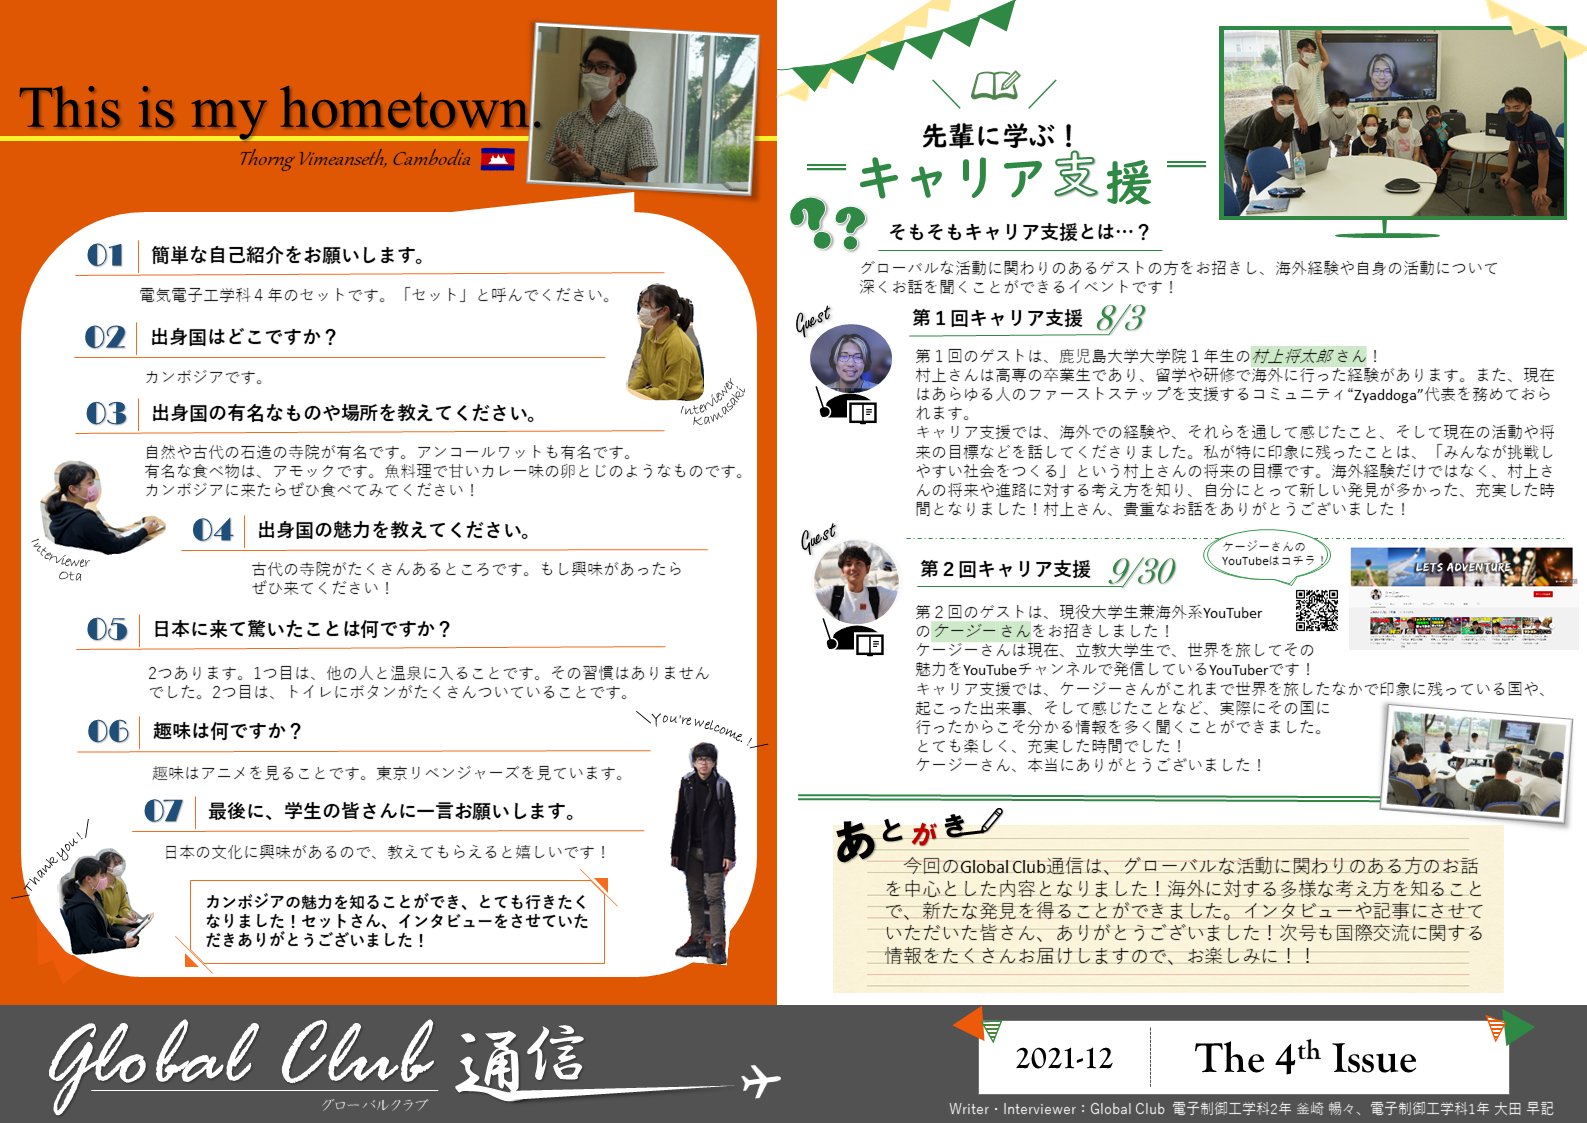 Global Club通信 ～The 4th Issue～を発行しました！